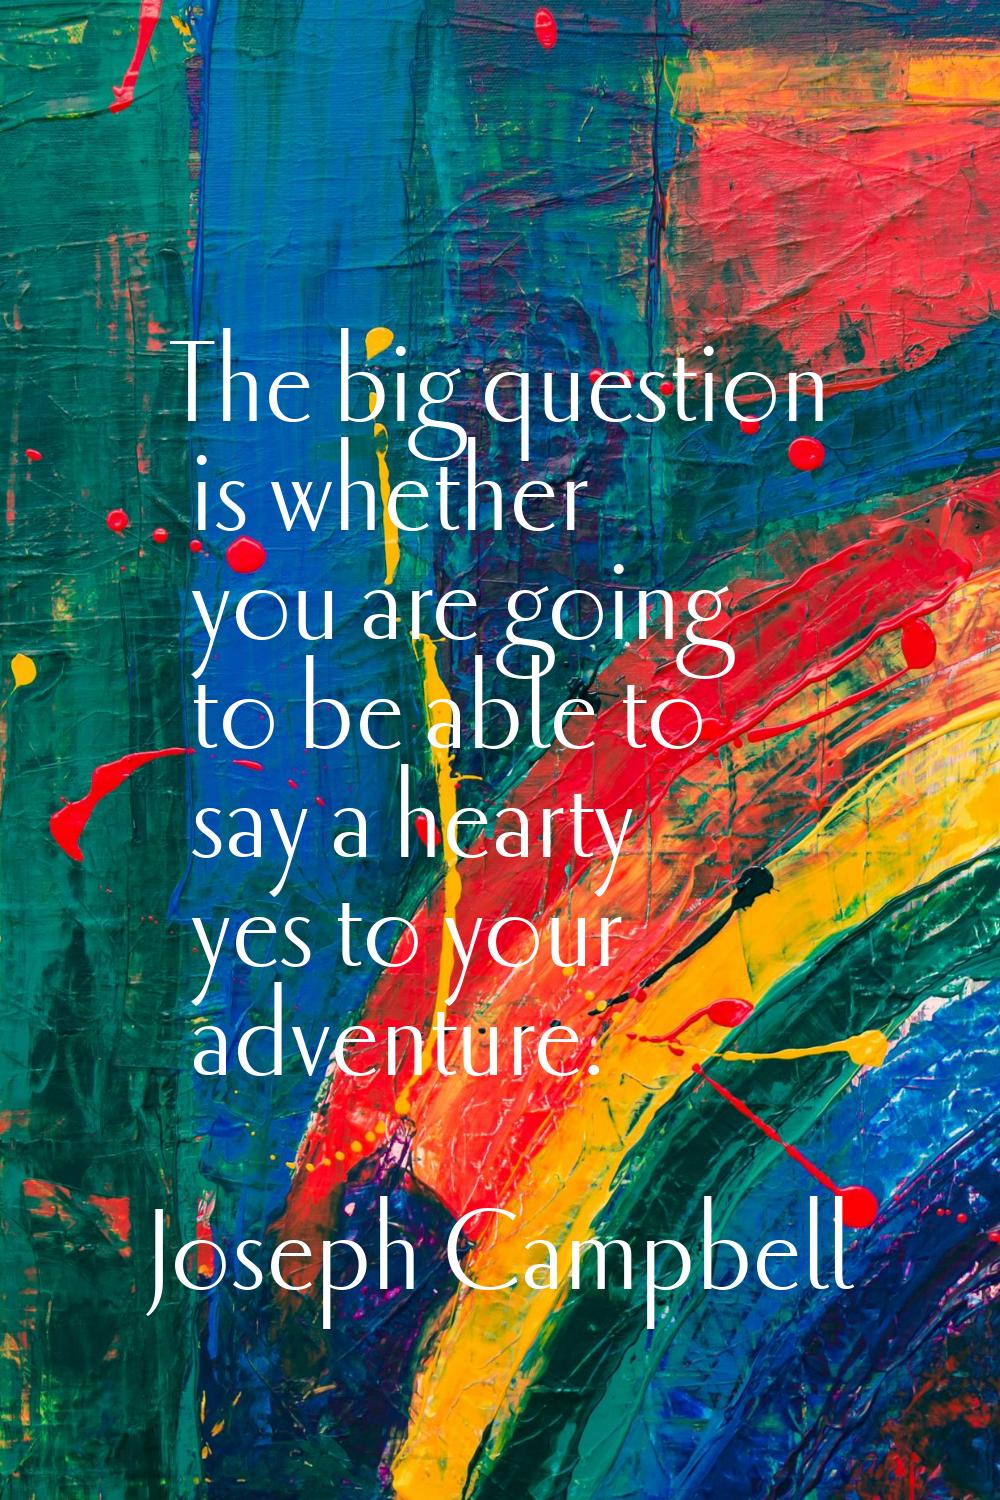 The big question is whether you are going to be able to say a hearty yes to your adventure.